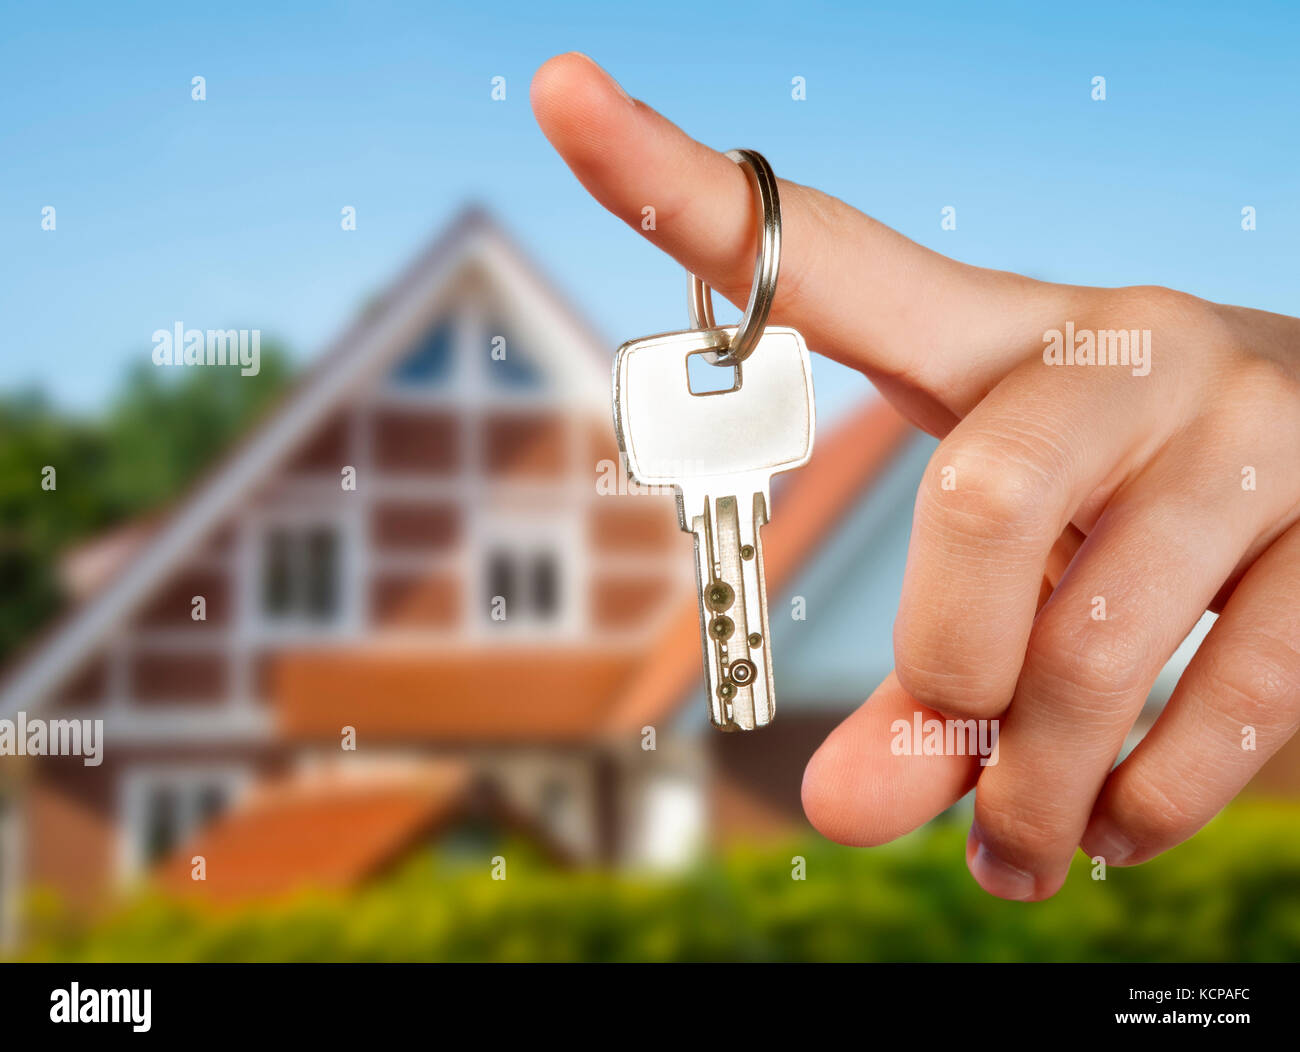 Hand holding a key in front of a country house Stock Photo